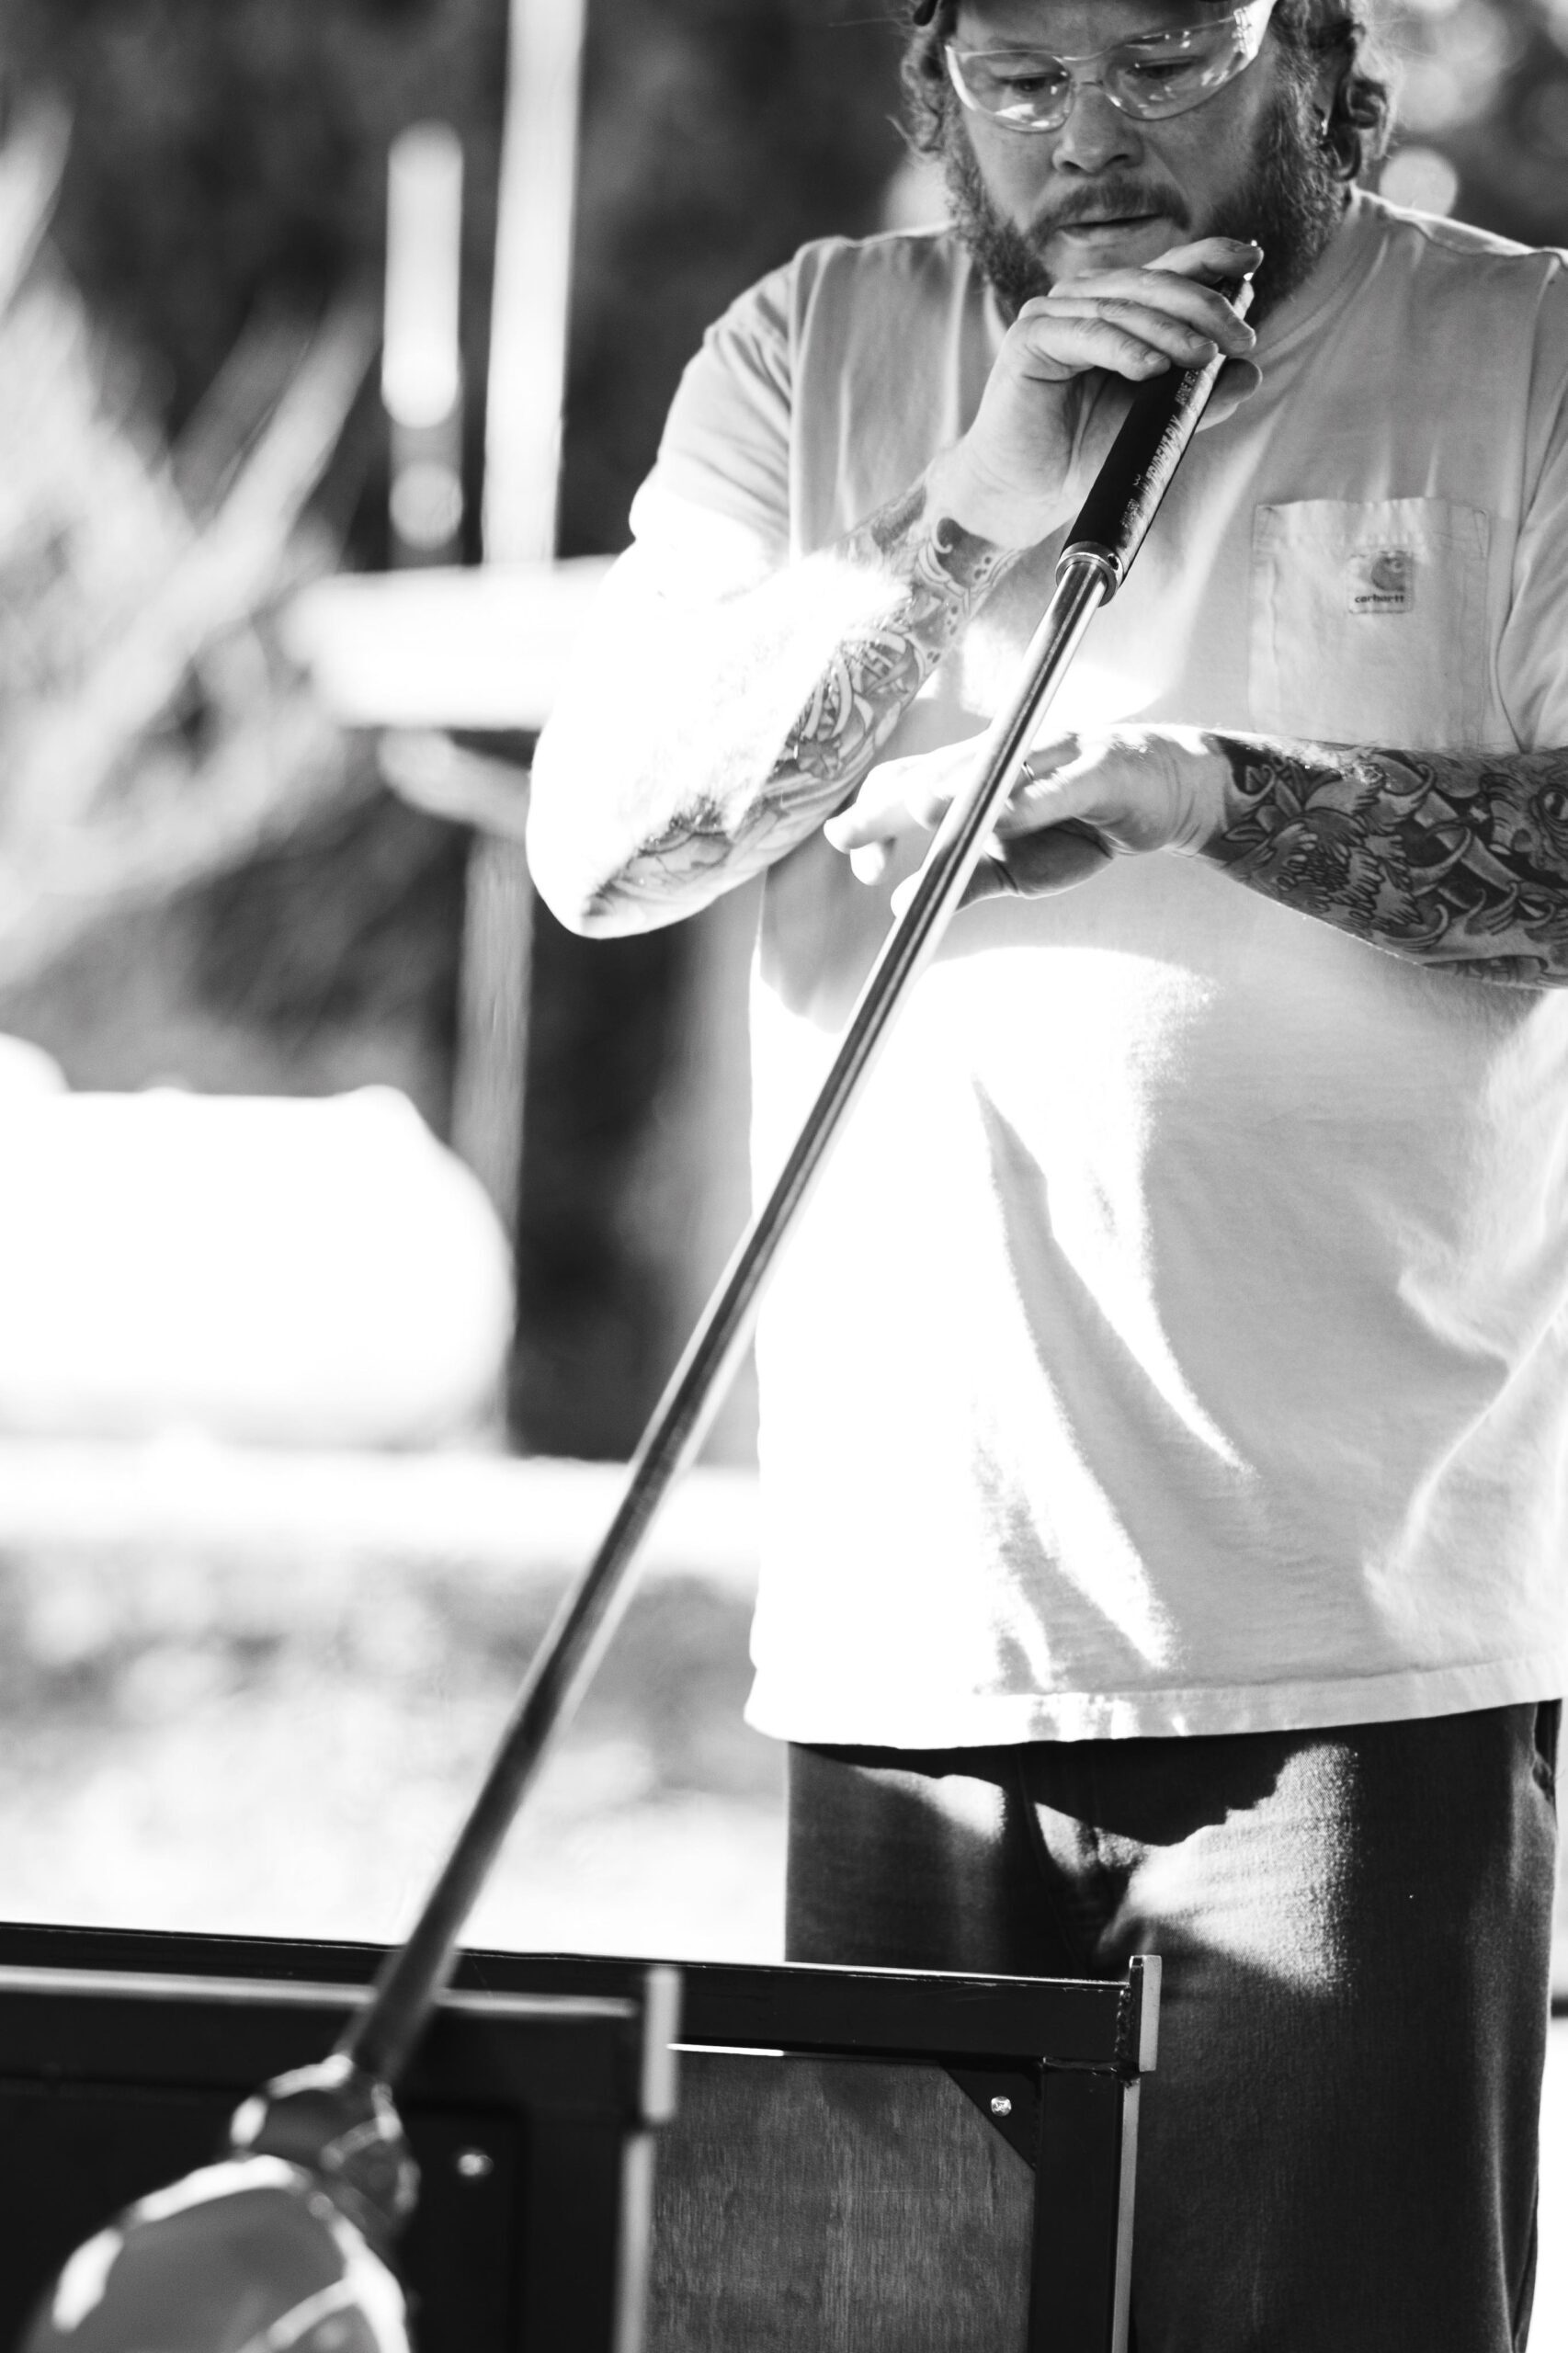 A man holding a pole with tattoos on it.